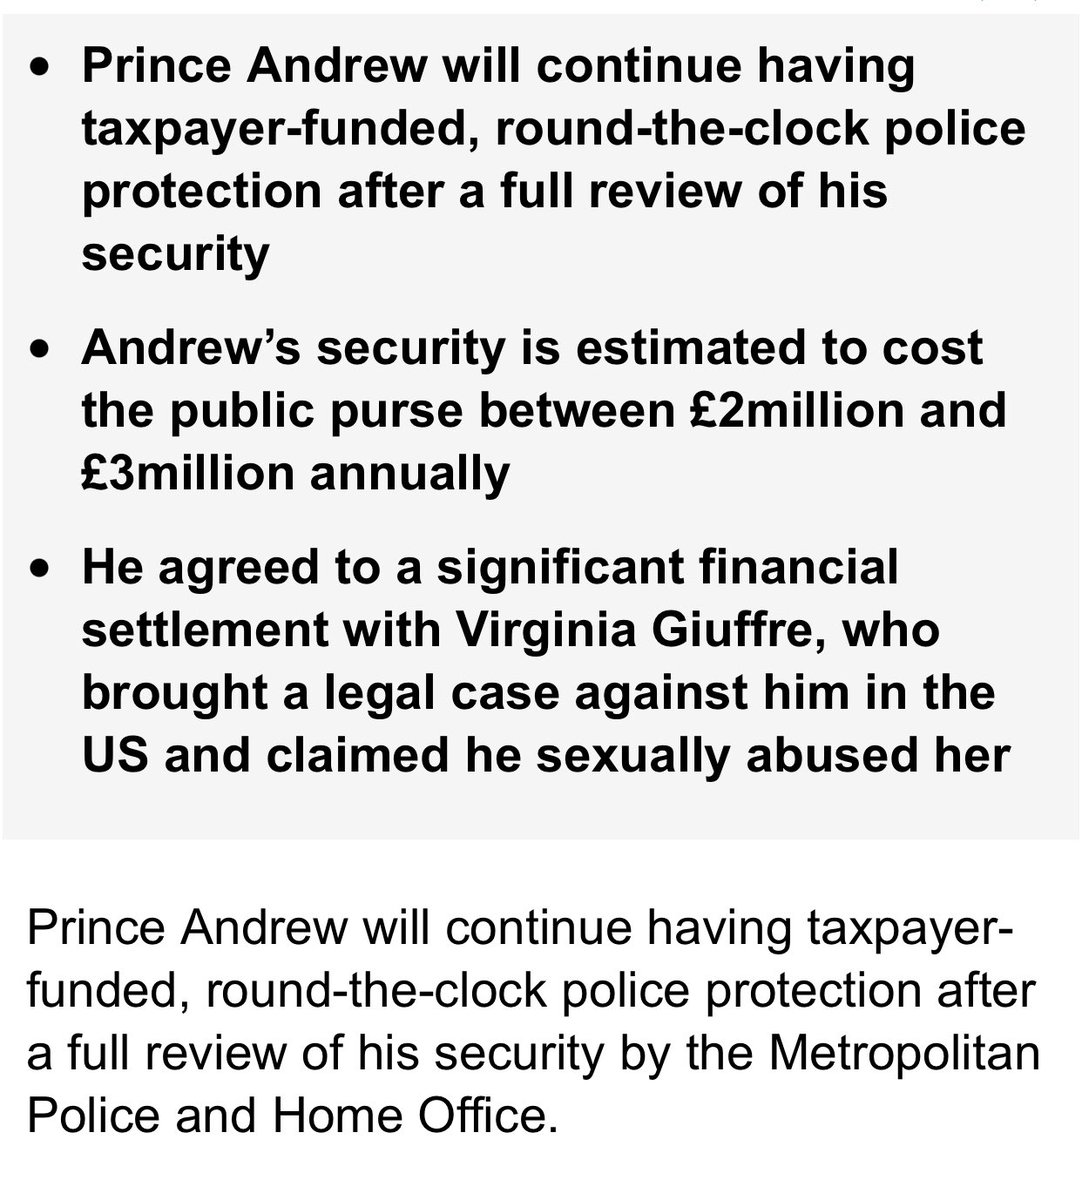 Can the racism Prince Harry is facing by protecting his wife, biracial Princess Meghan from U.K. racism be any more clearer? 
The paedo white non working Prince Andrew gets Taxpayer funded security. But the people’s Prince Harry is not even allowed to pay for it. #DuchessMeghan